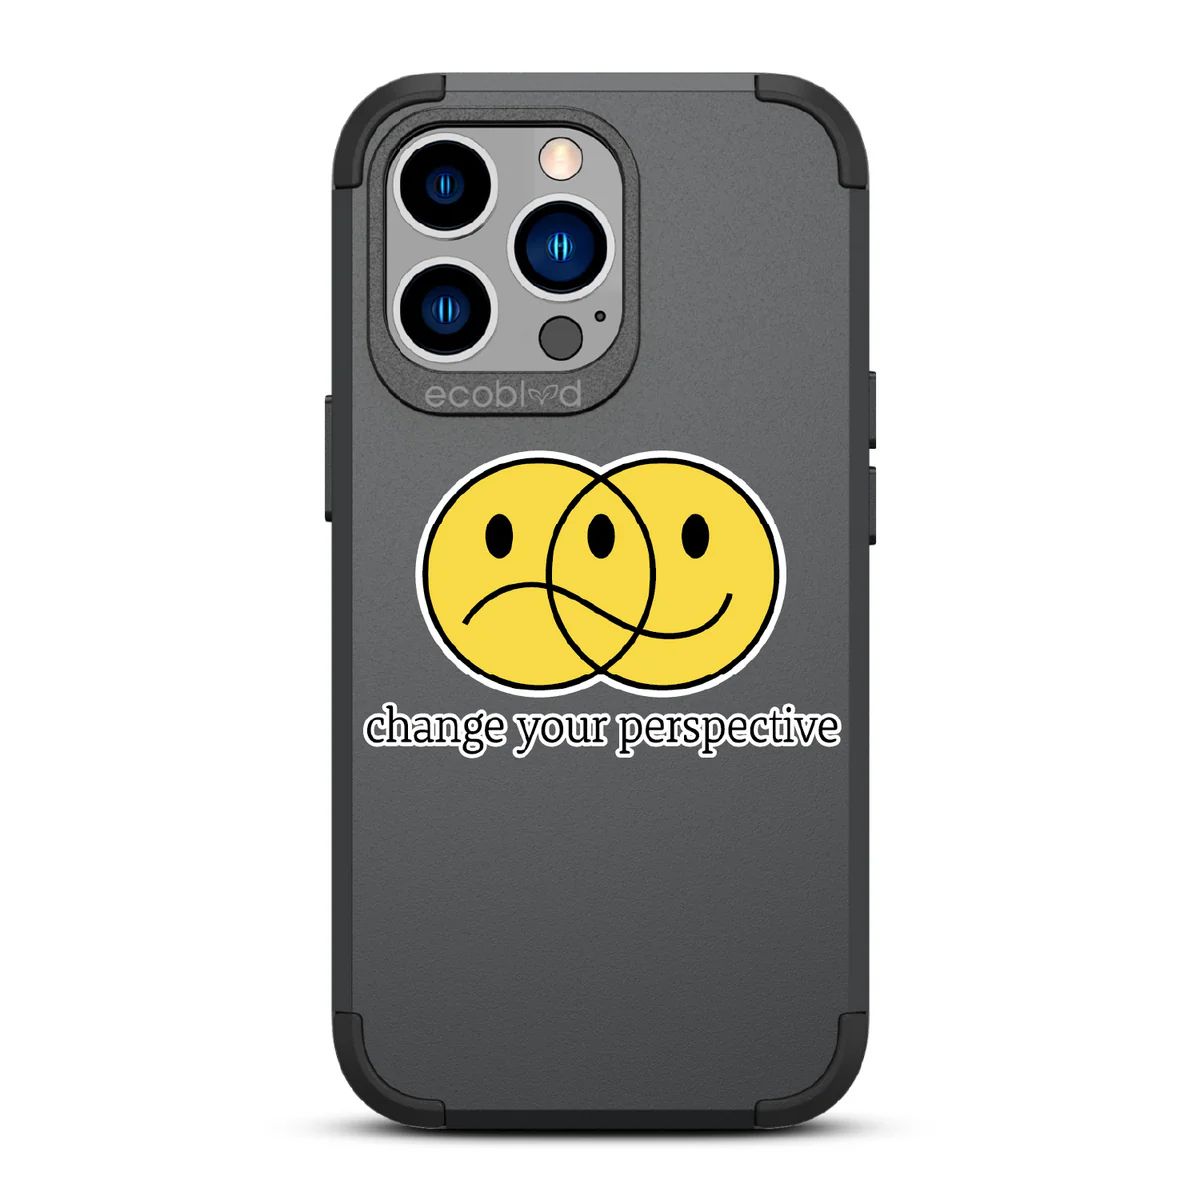 Perspective - Rugged iPhone 12/13 Pro Max Case | EcoBlvd | EcoBlvd